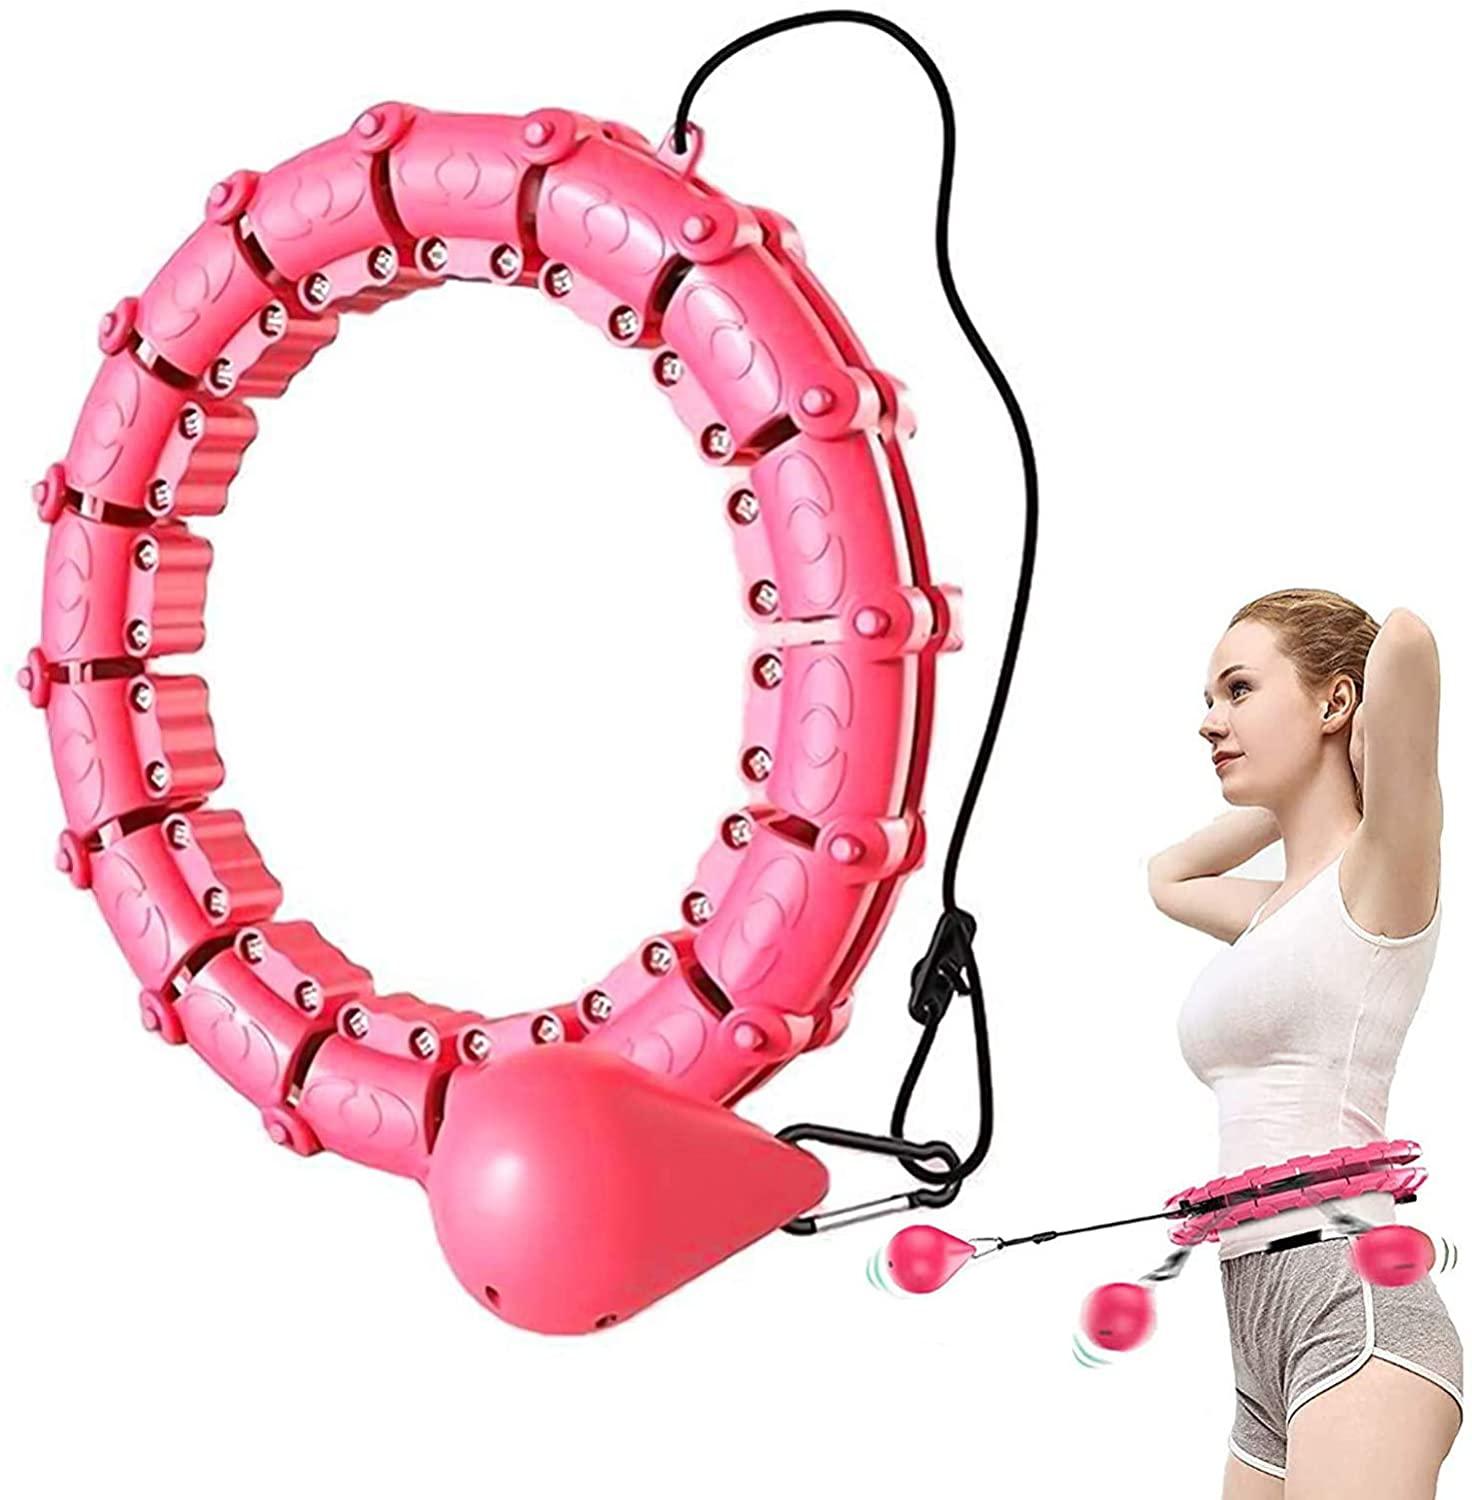 18-24Knots Adjustable Exercise Hoop Smart Exercise Hoop Weight Loss - Lacatang Market